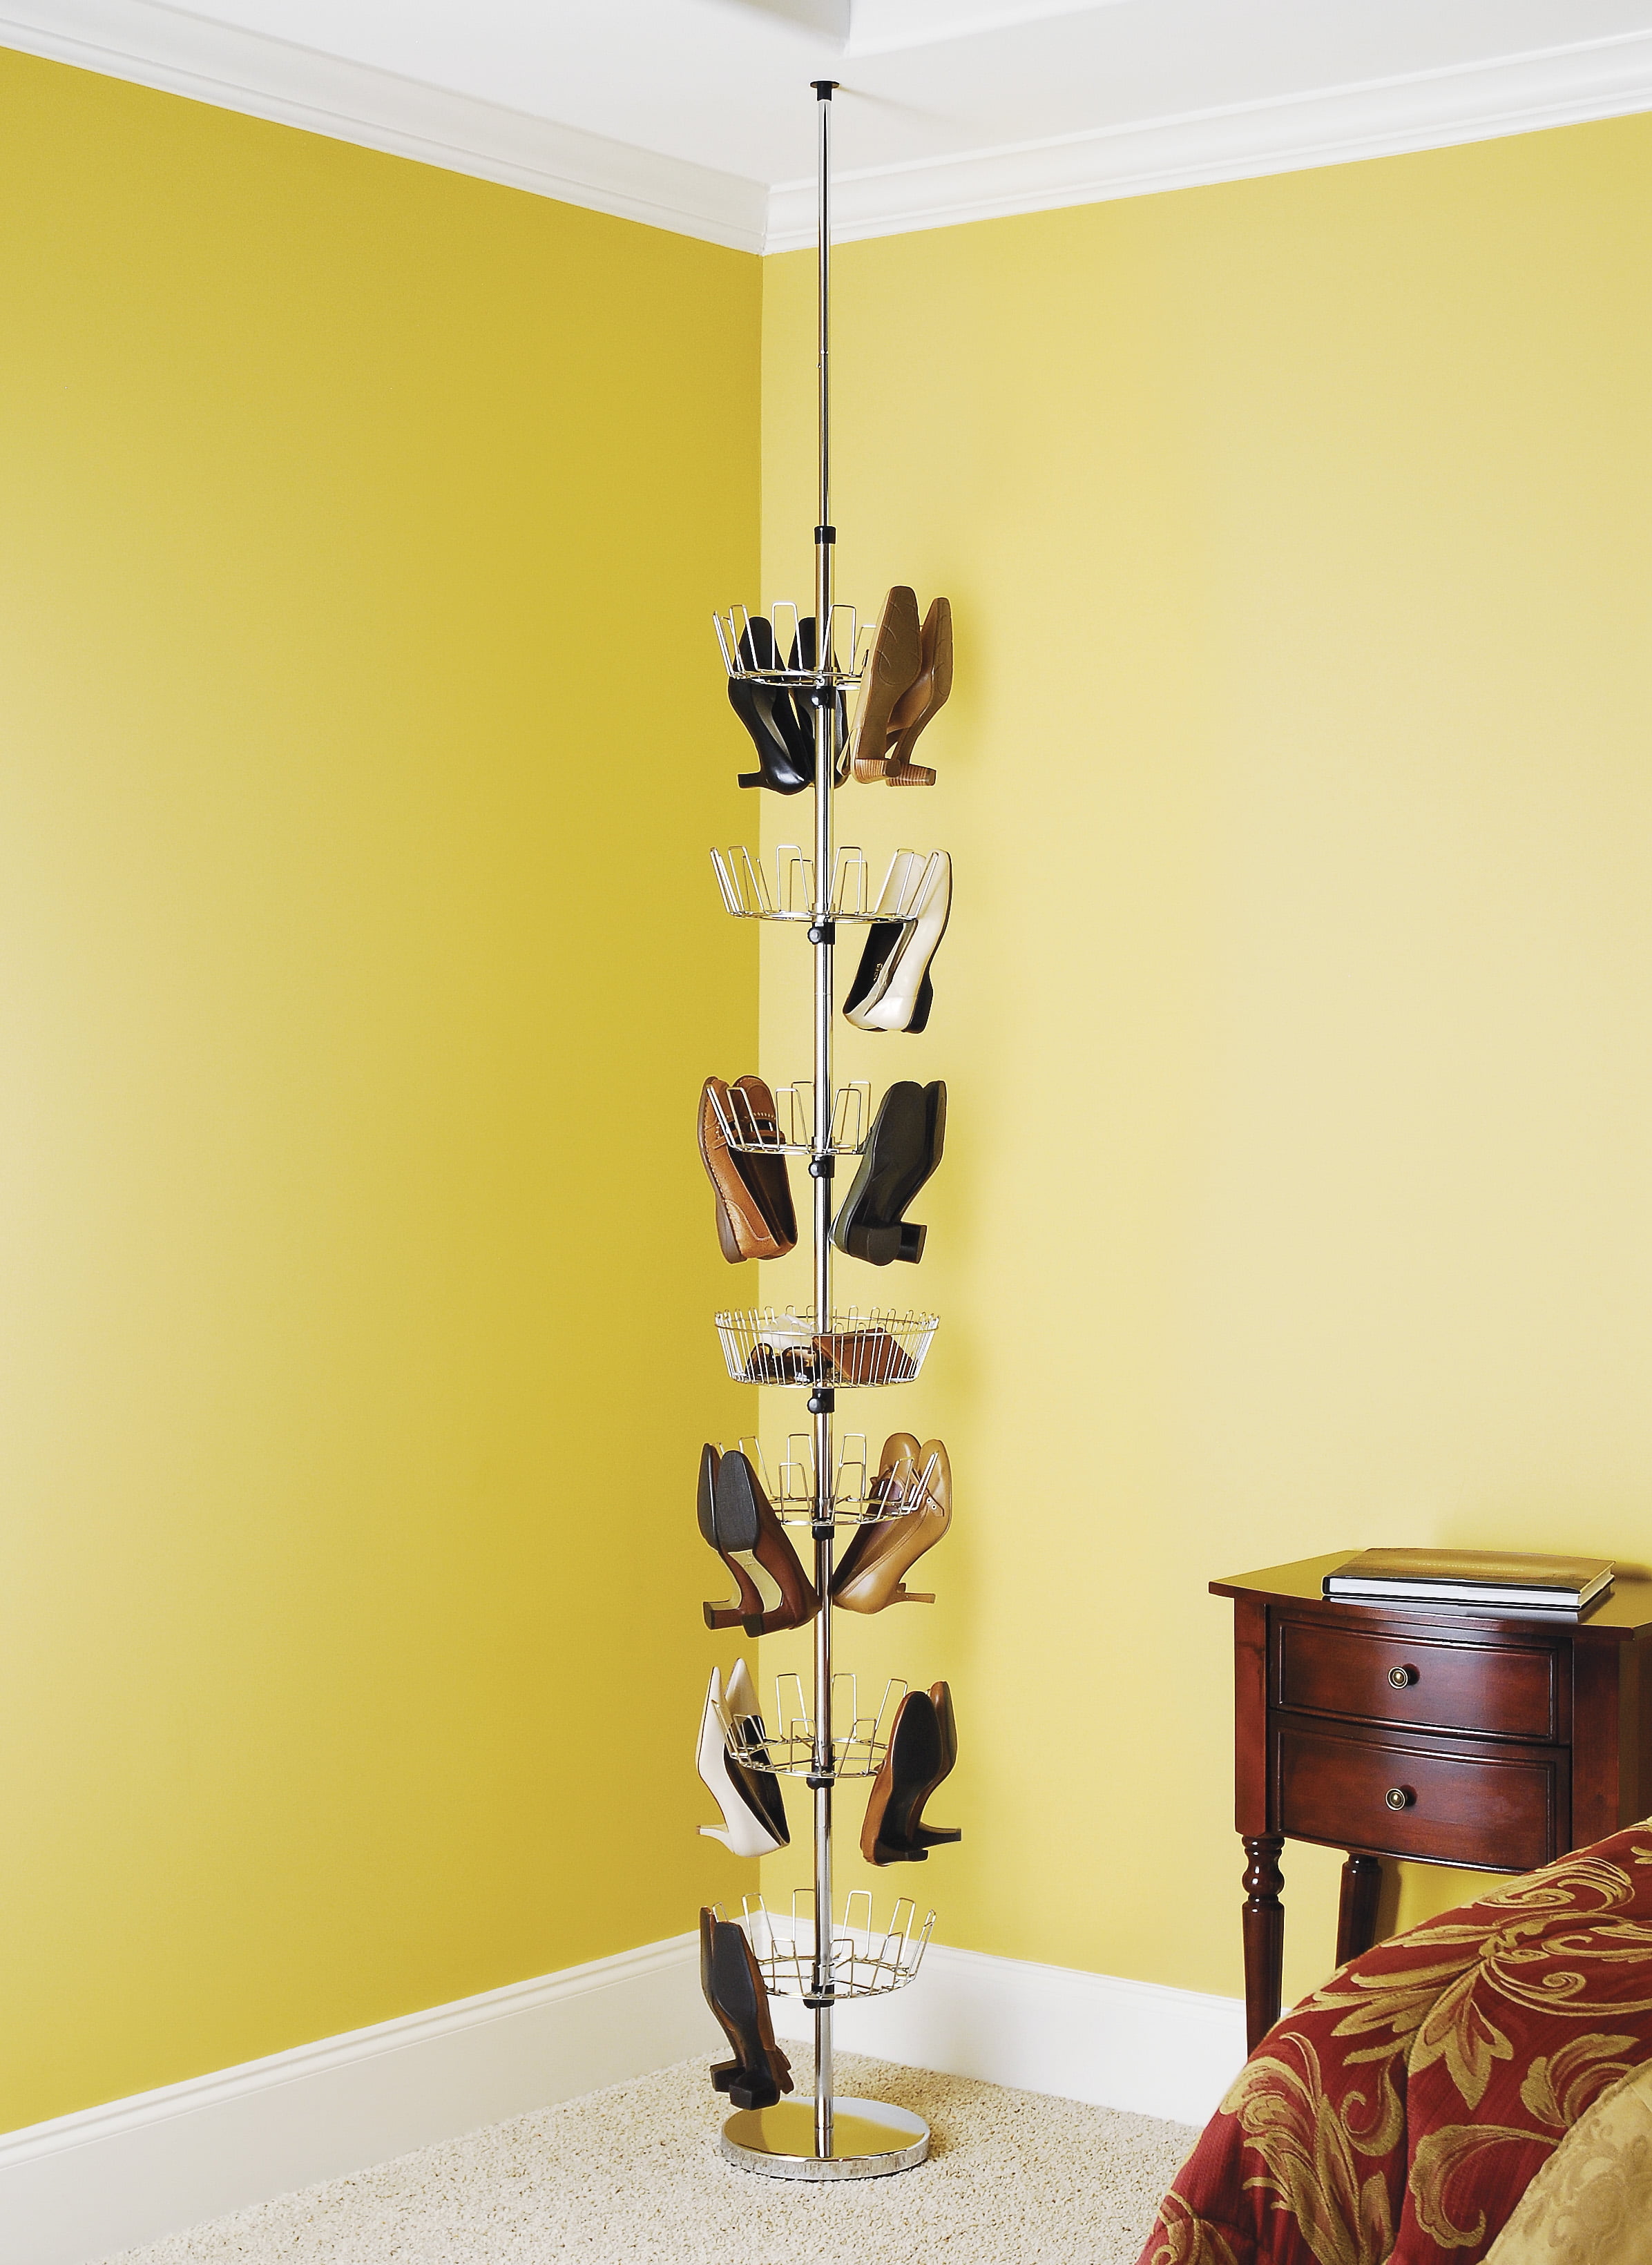 A DIYer Built This Floor-to-Ceiling Shoe Storage Wall—and We Want